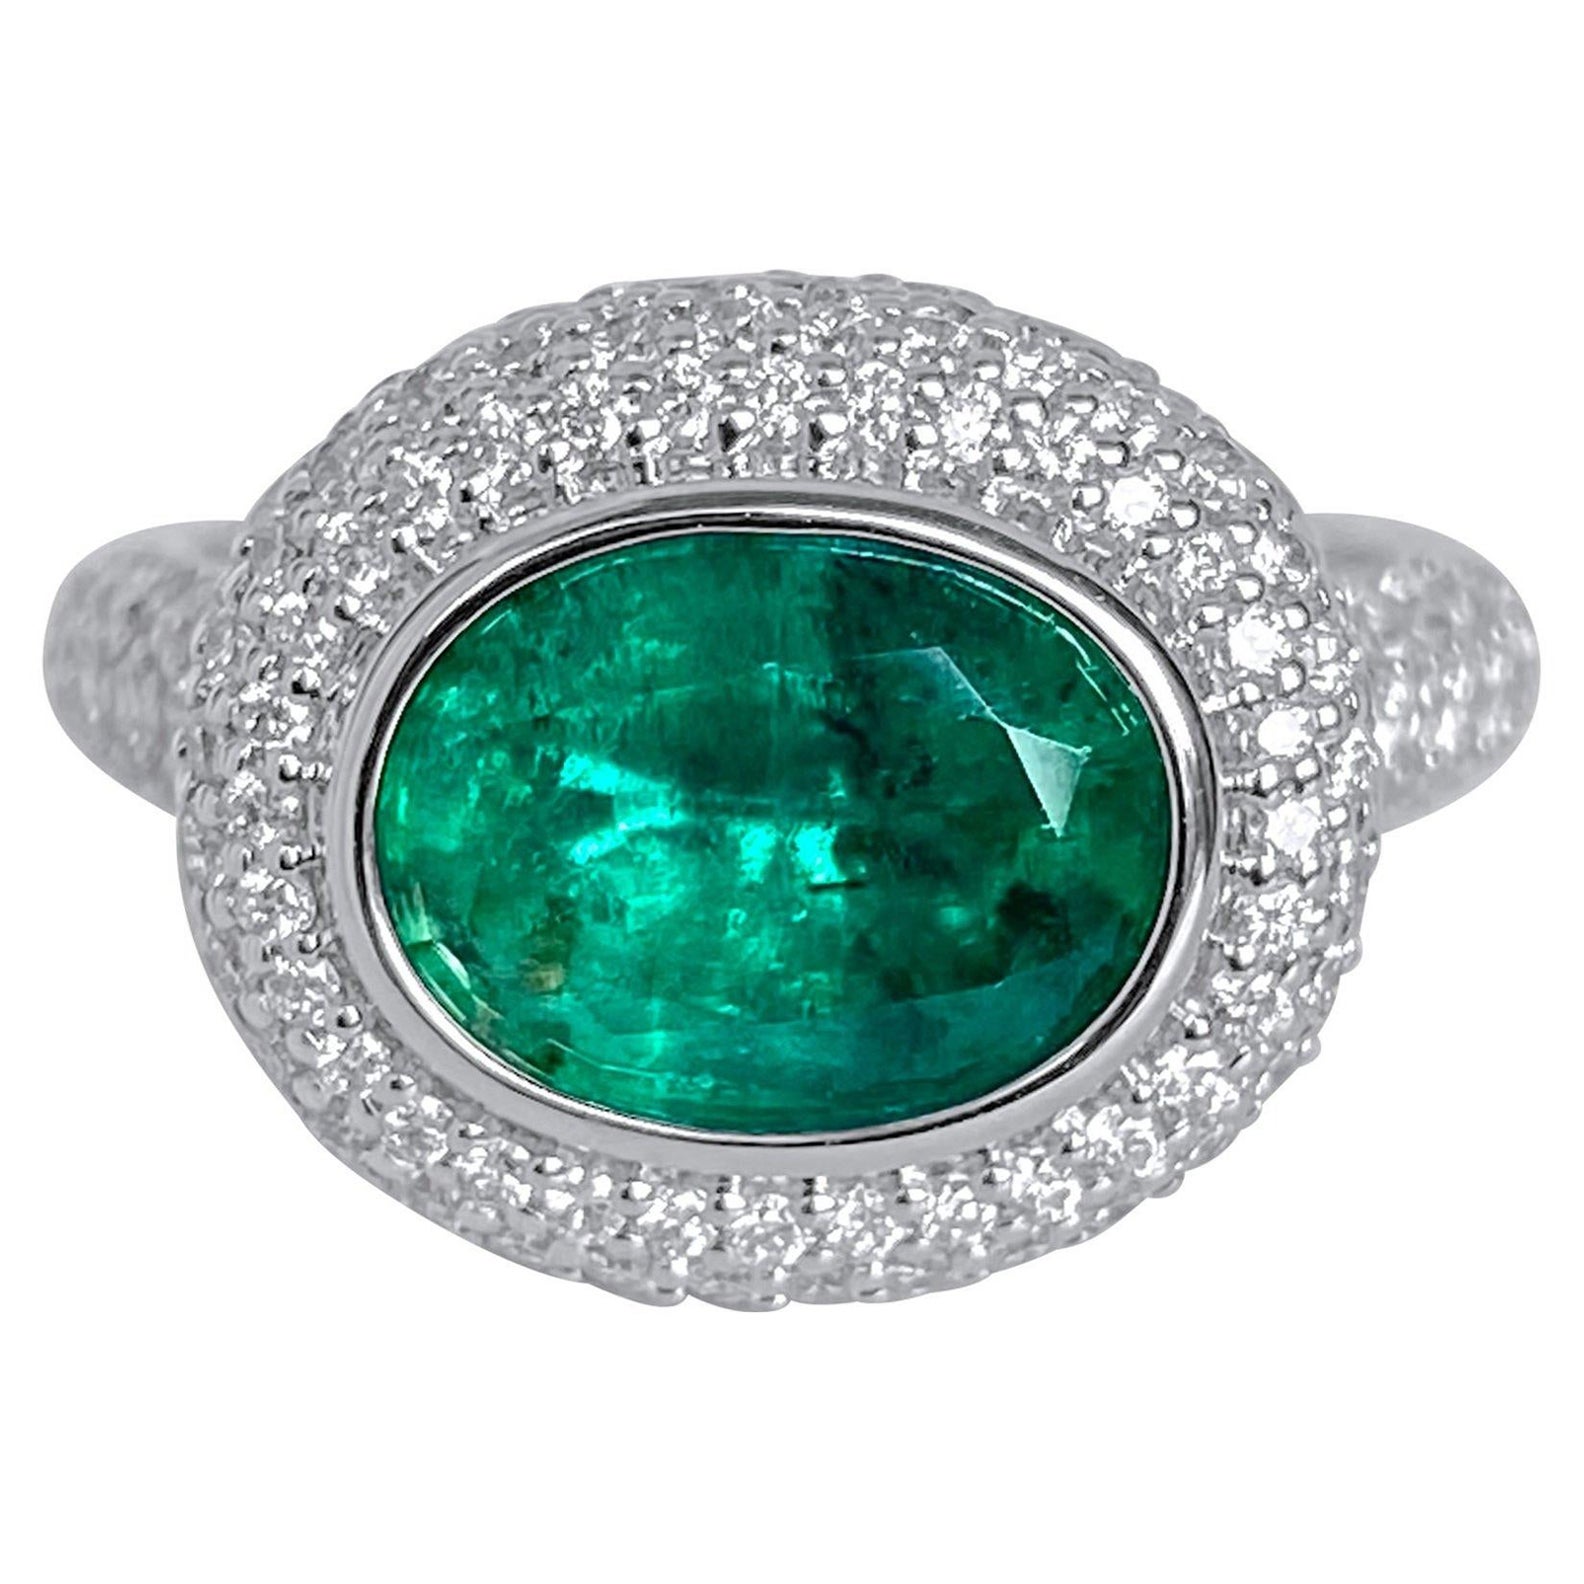 Lotus East West Ring with 3ct Emerald Solitaire, Blue Sapphire and Diamonds